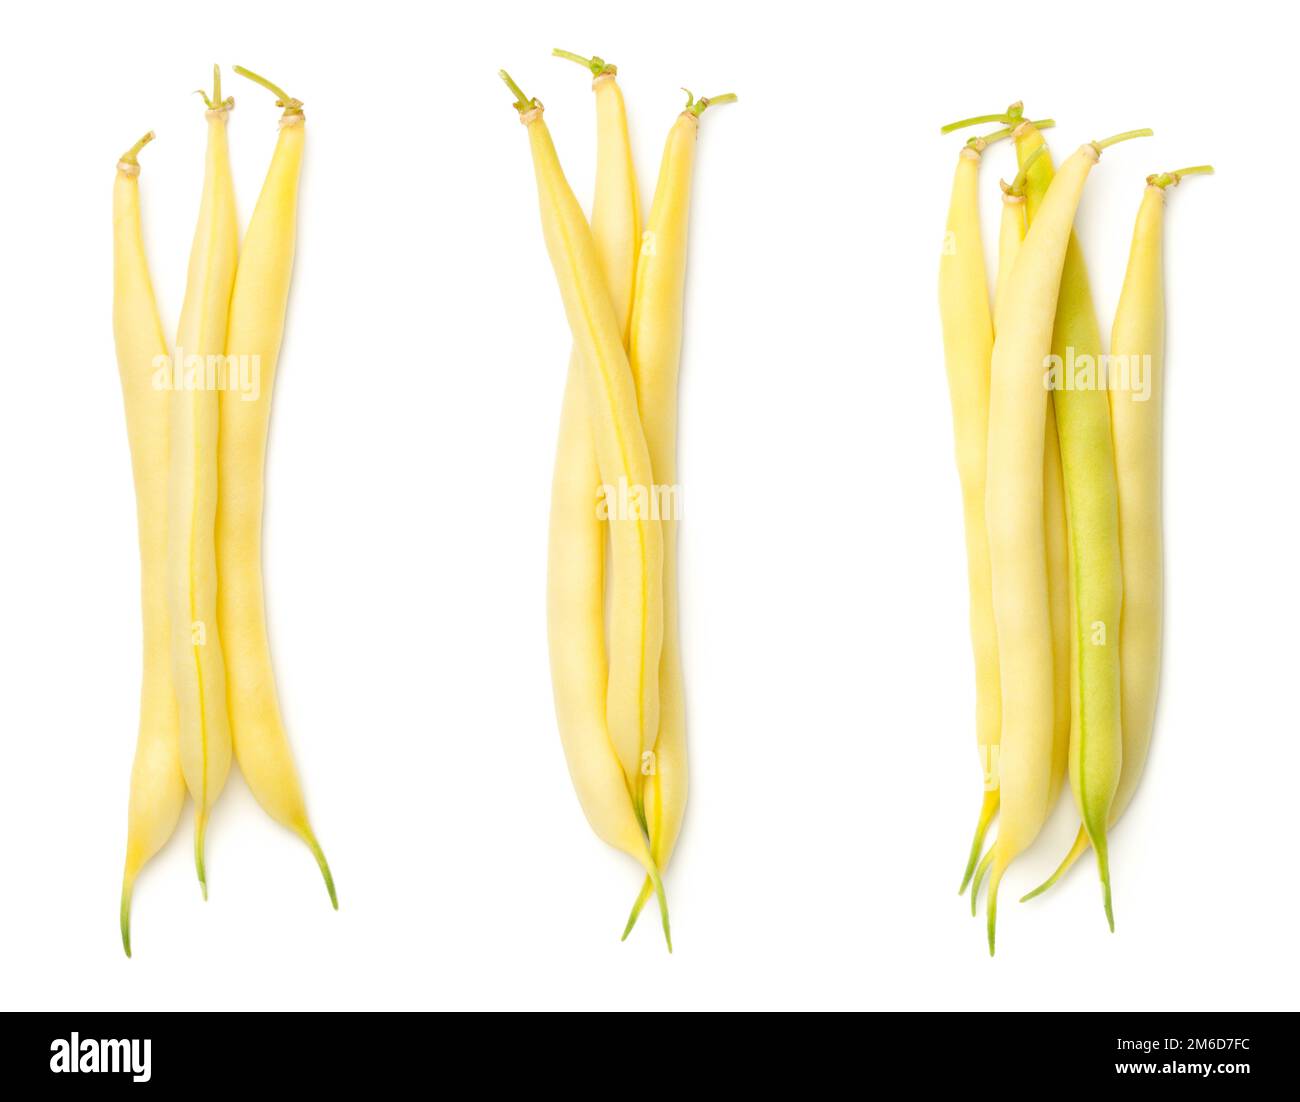 Yellow Beans Isolated On White Background Stock Photo